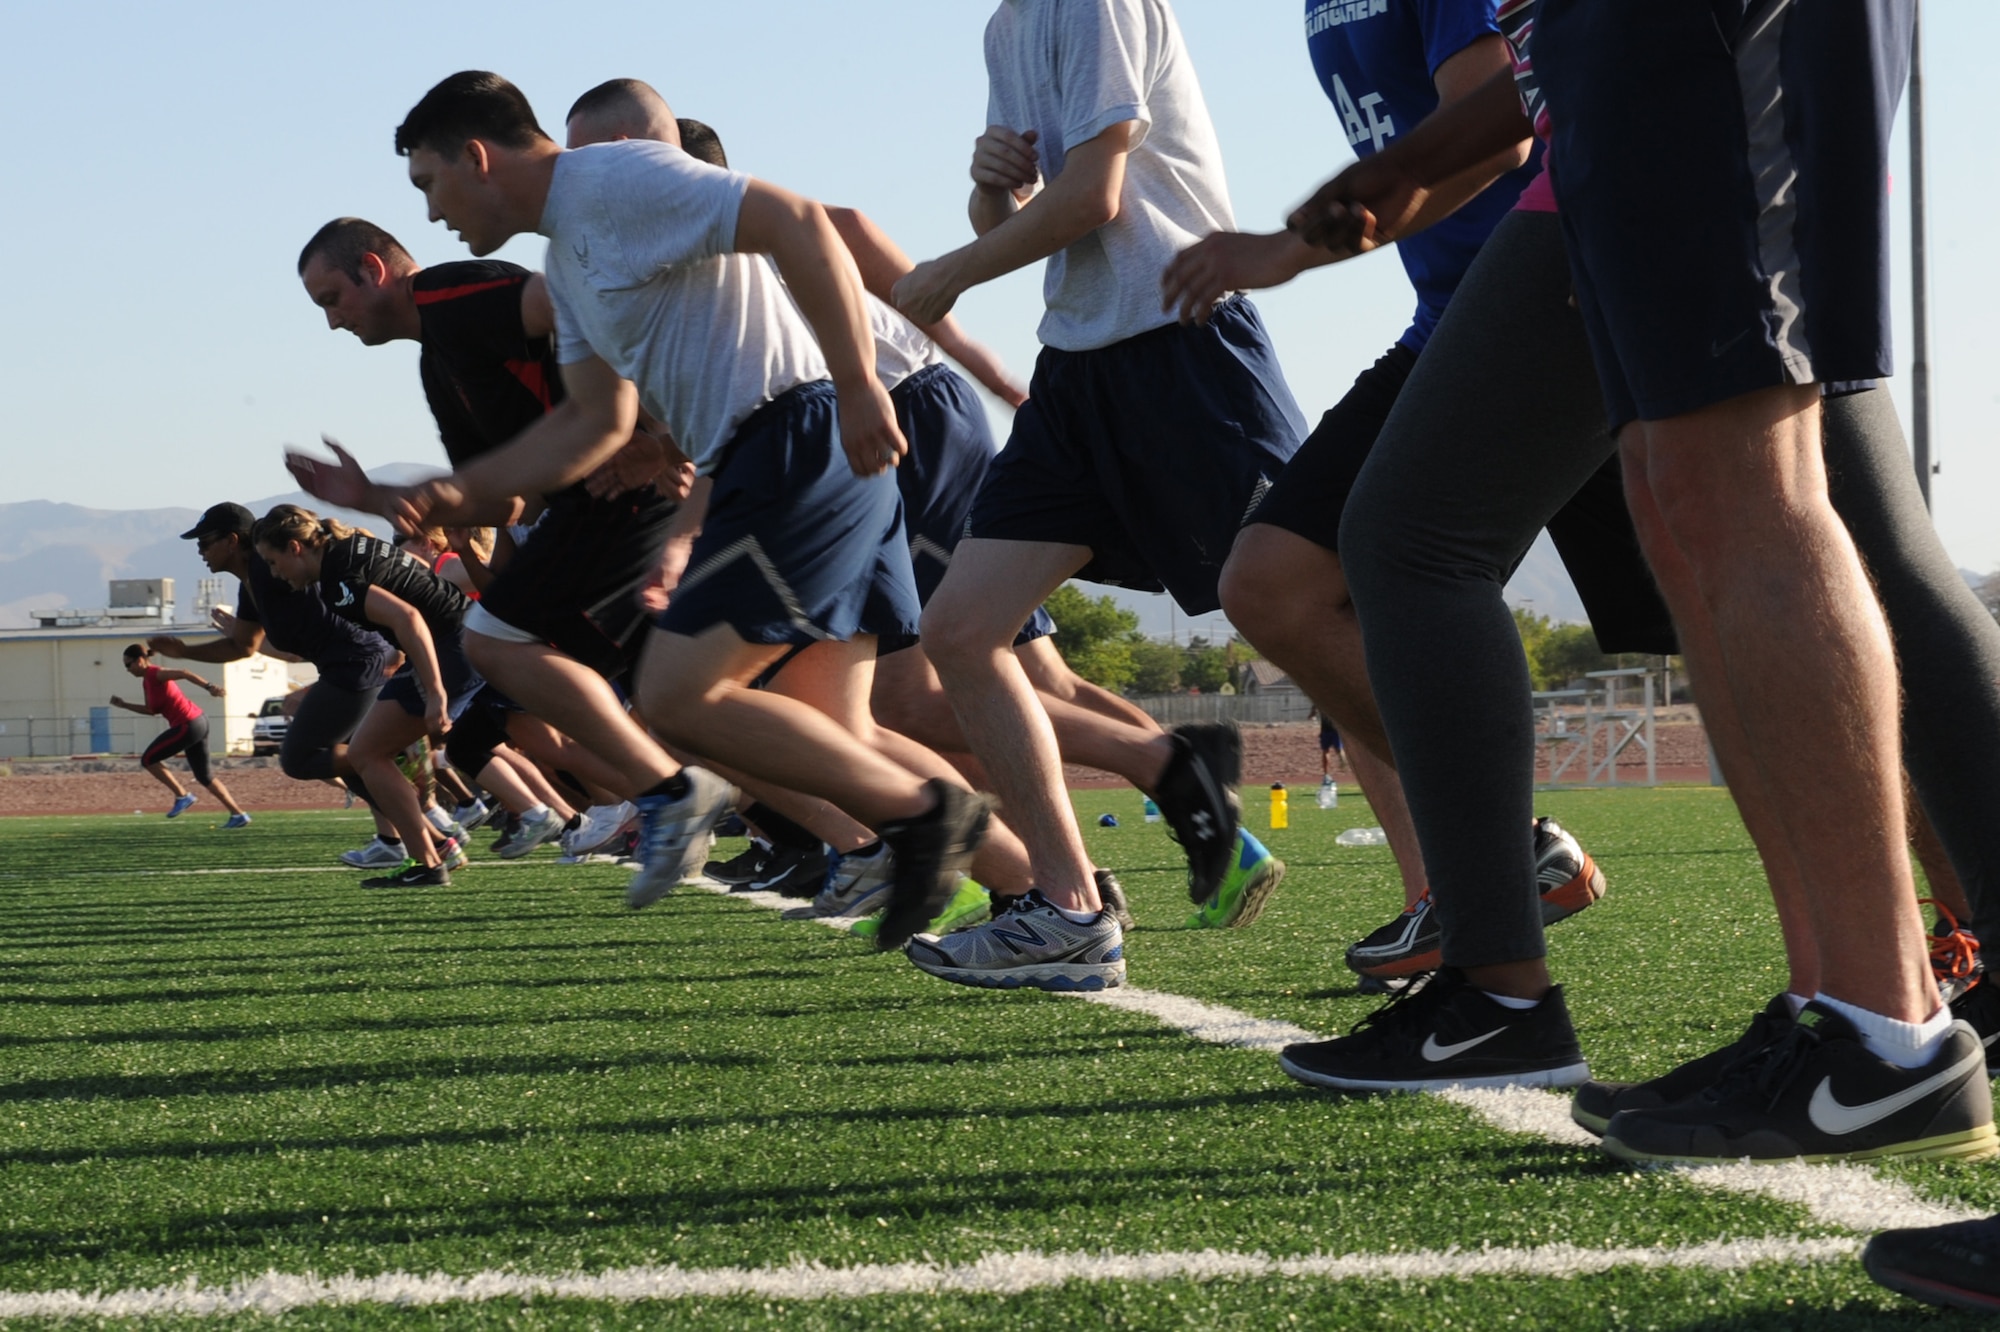 Members of the Nellis community sprint across the Warrior Fitness Center football field during a Warrior Trained Fitness workout June 12, 2014, at Nellis Air Force Base, Nev.  The WTF exercise session was the last to be hosted by Missy Cornish, wife of Col. Barry Cornish, 99th Air Base Wing commander. (U.S. Air Force photo by Tech. Sgt. Taylor Worley)